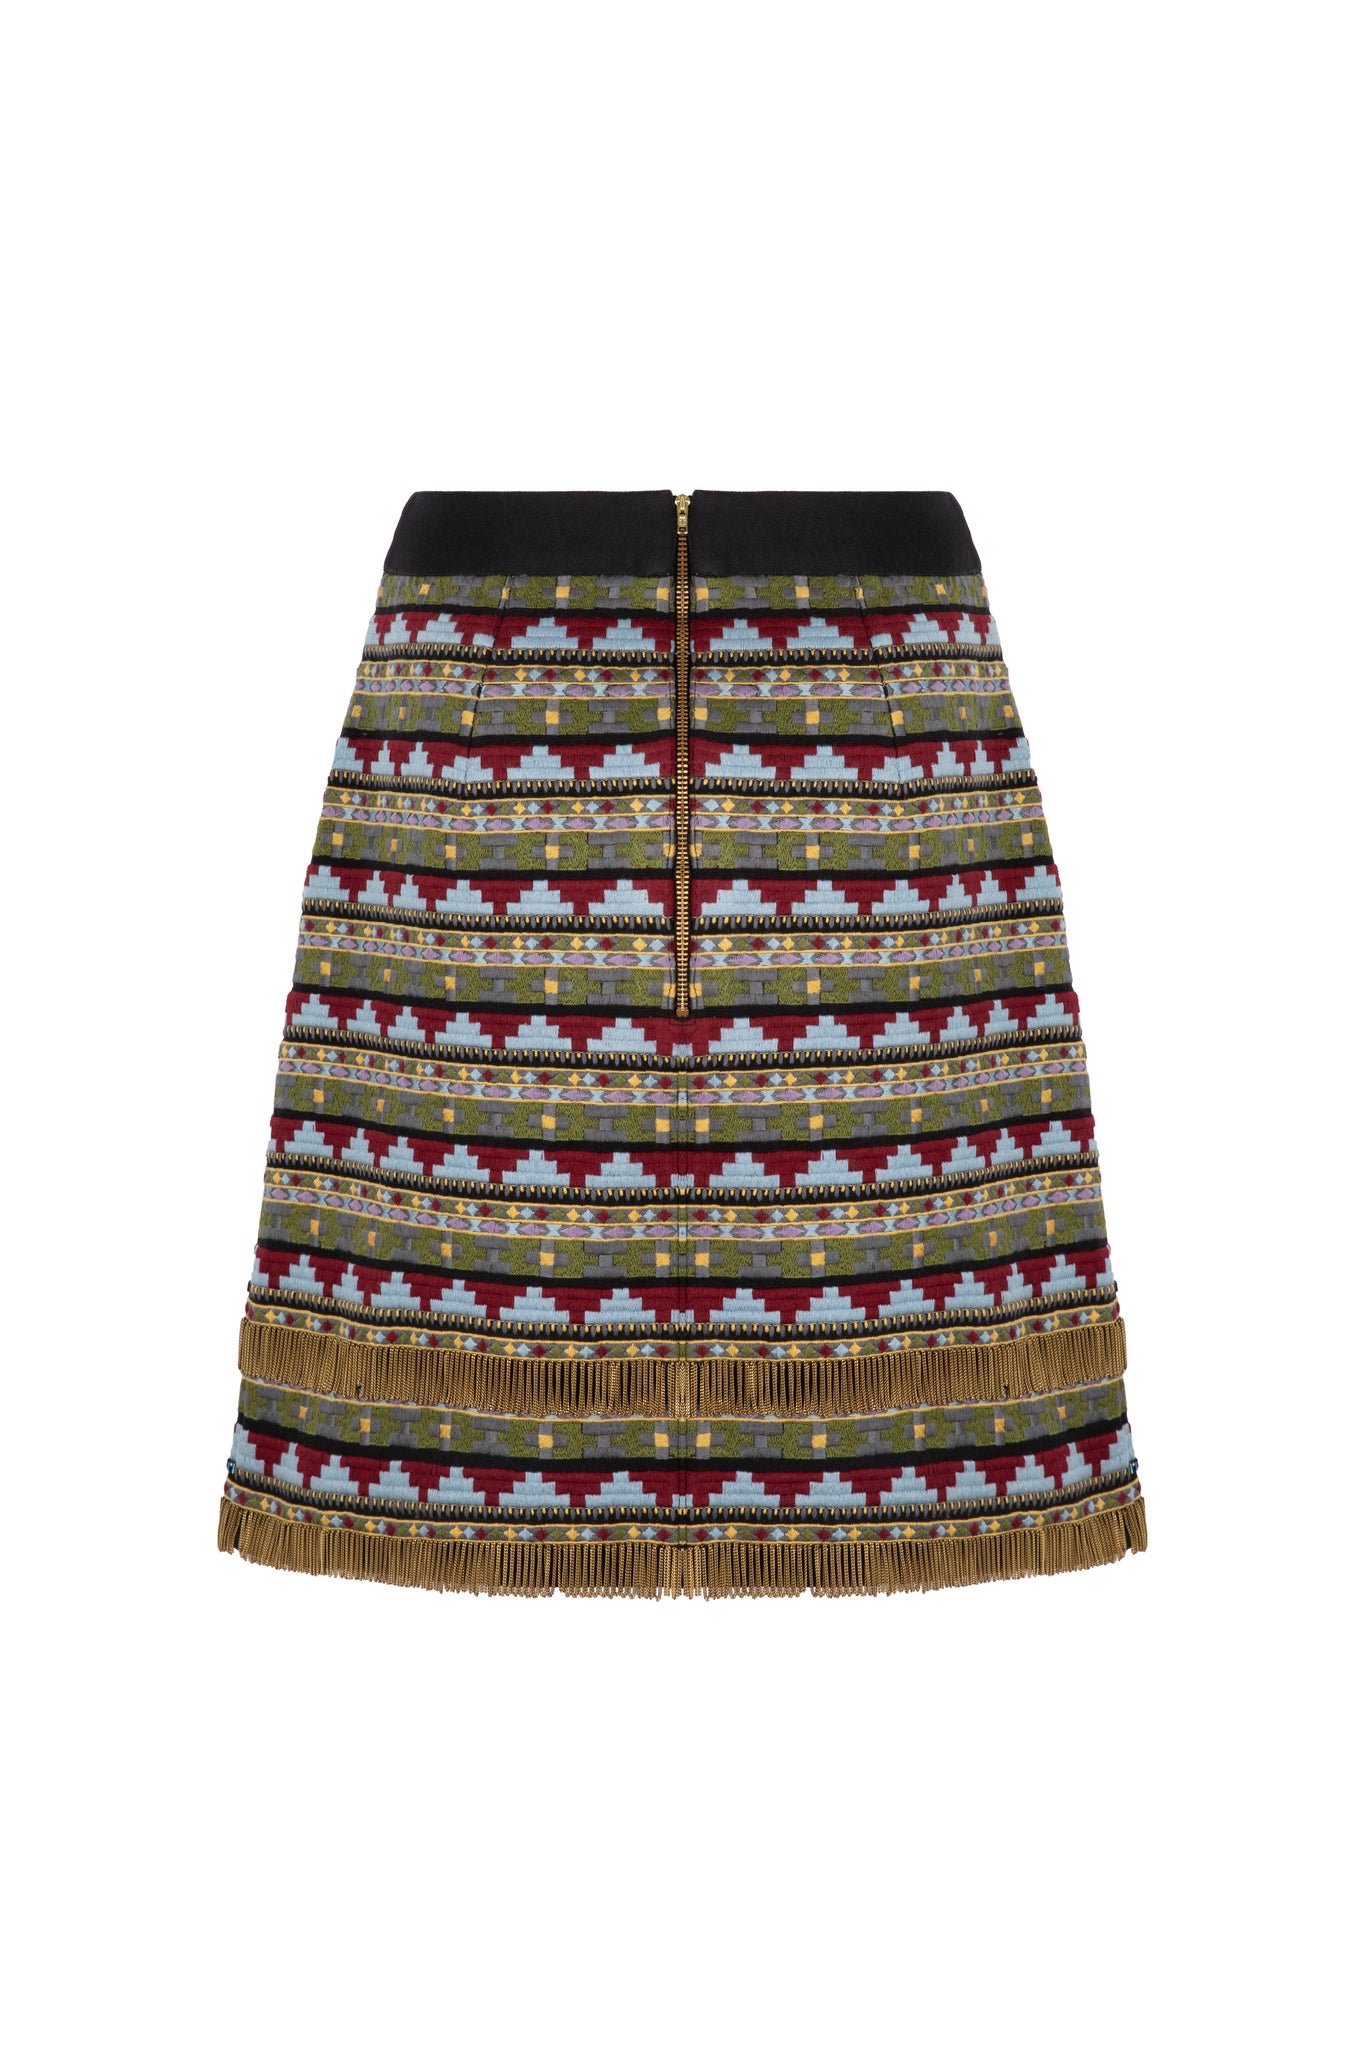 Back view of A-line embellished skirt with waistband and zip detail